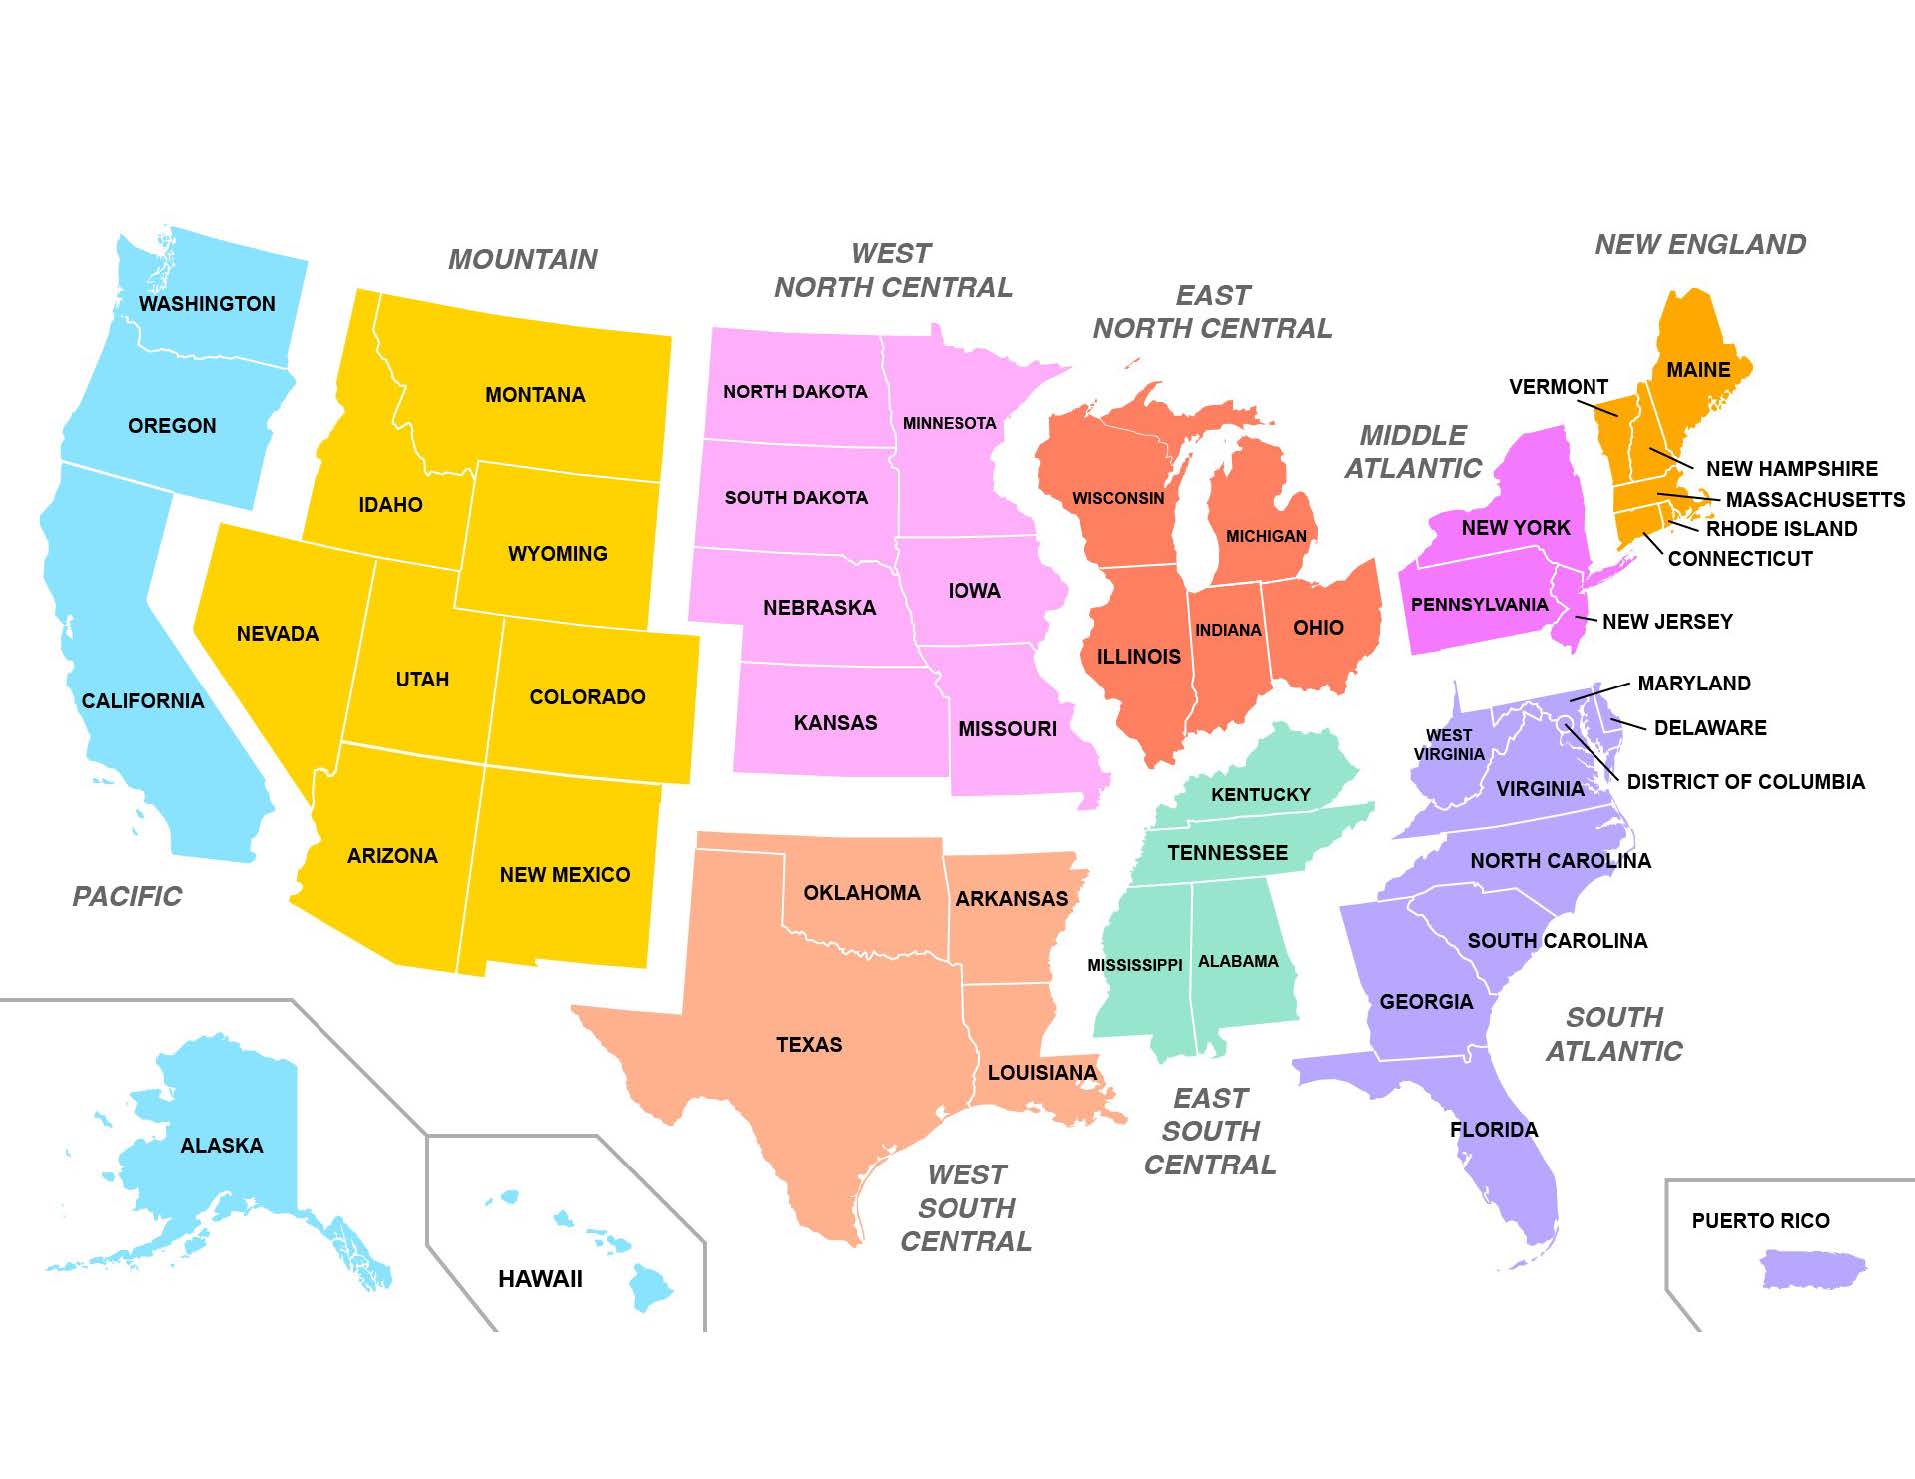 A map of the United States broken into geographic divisions